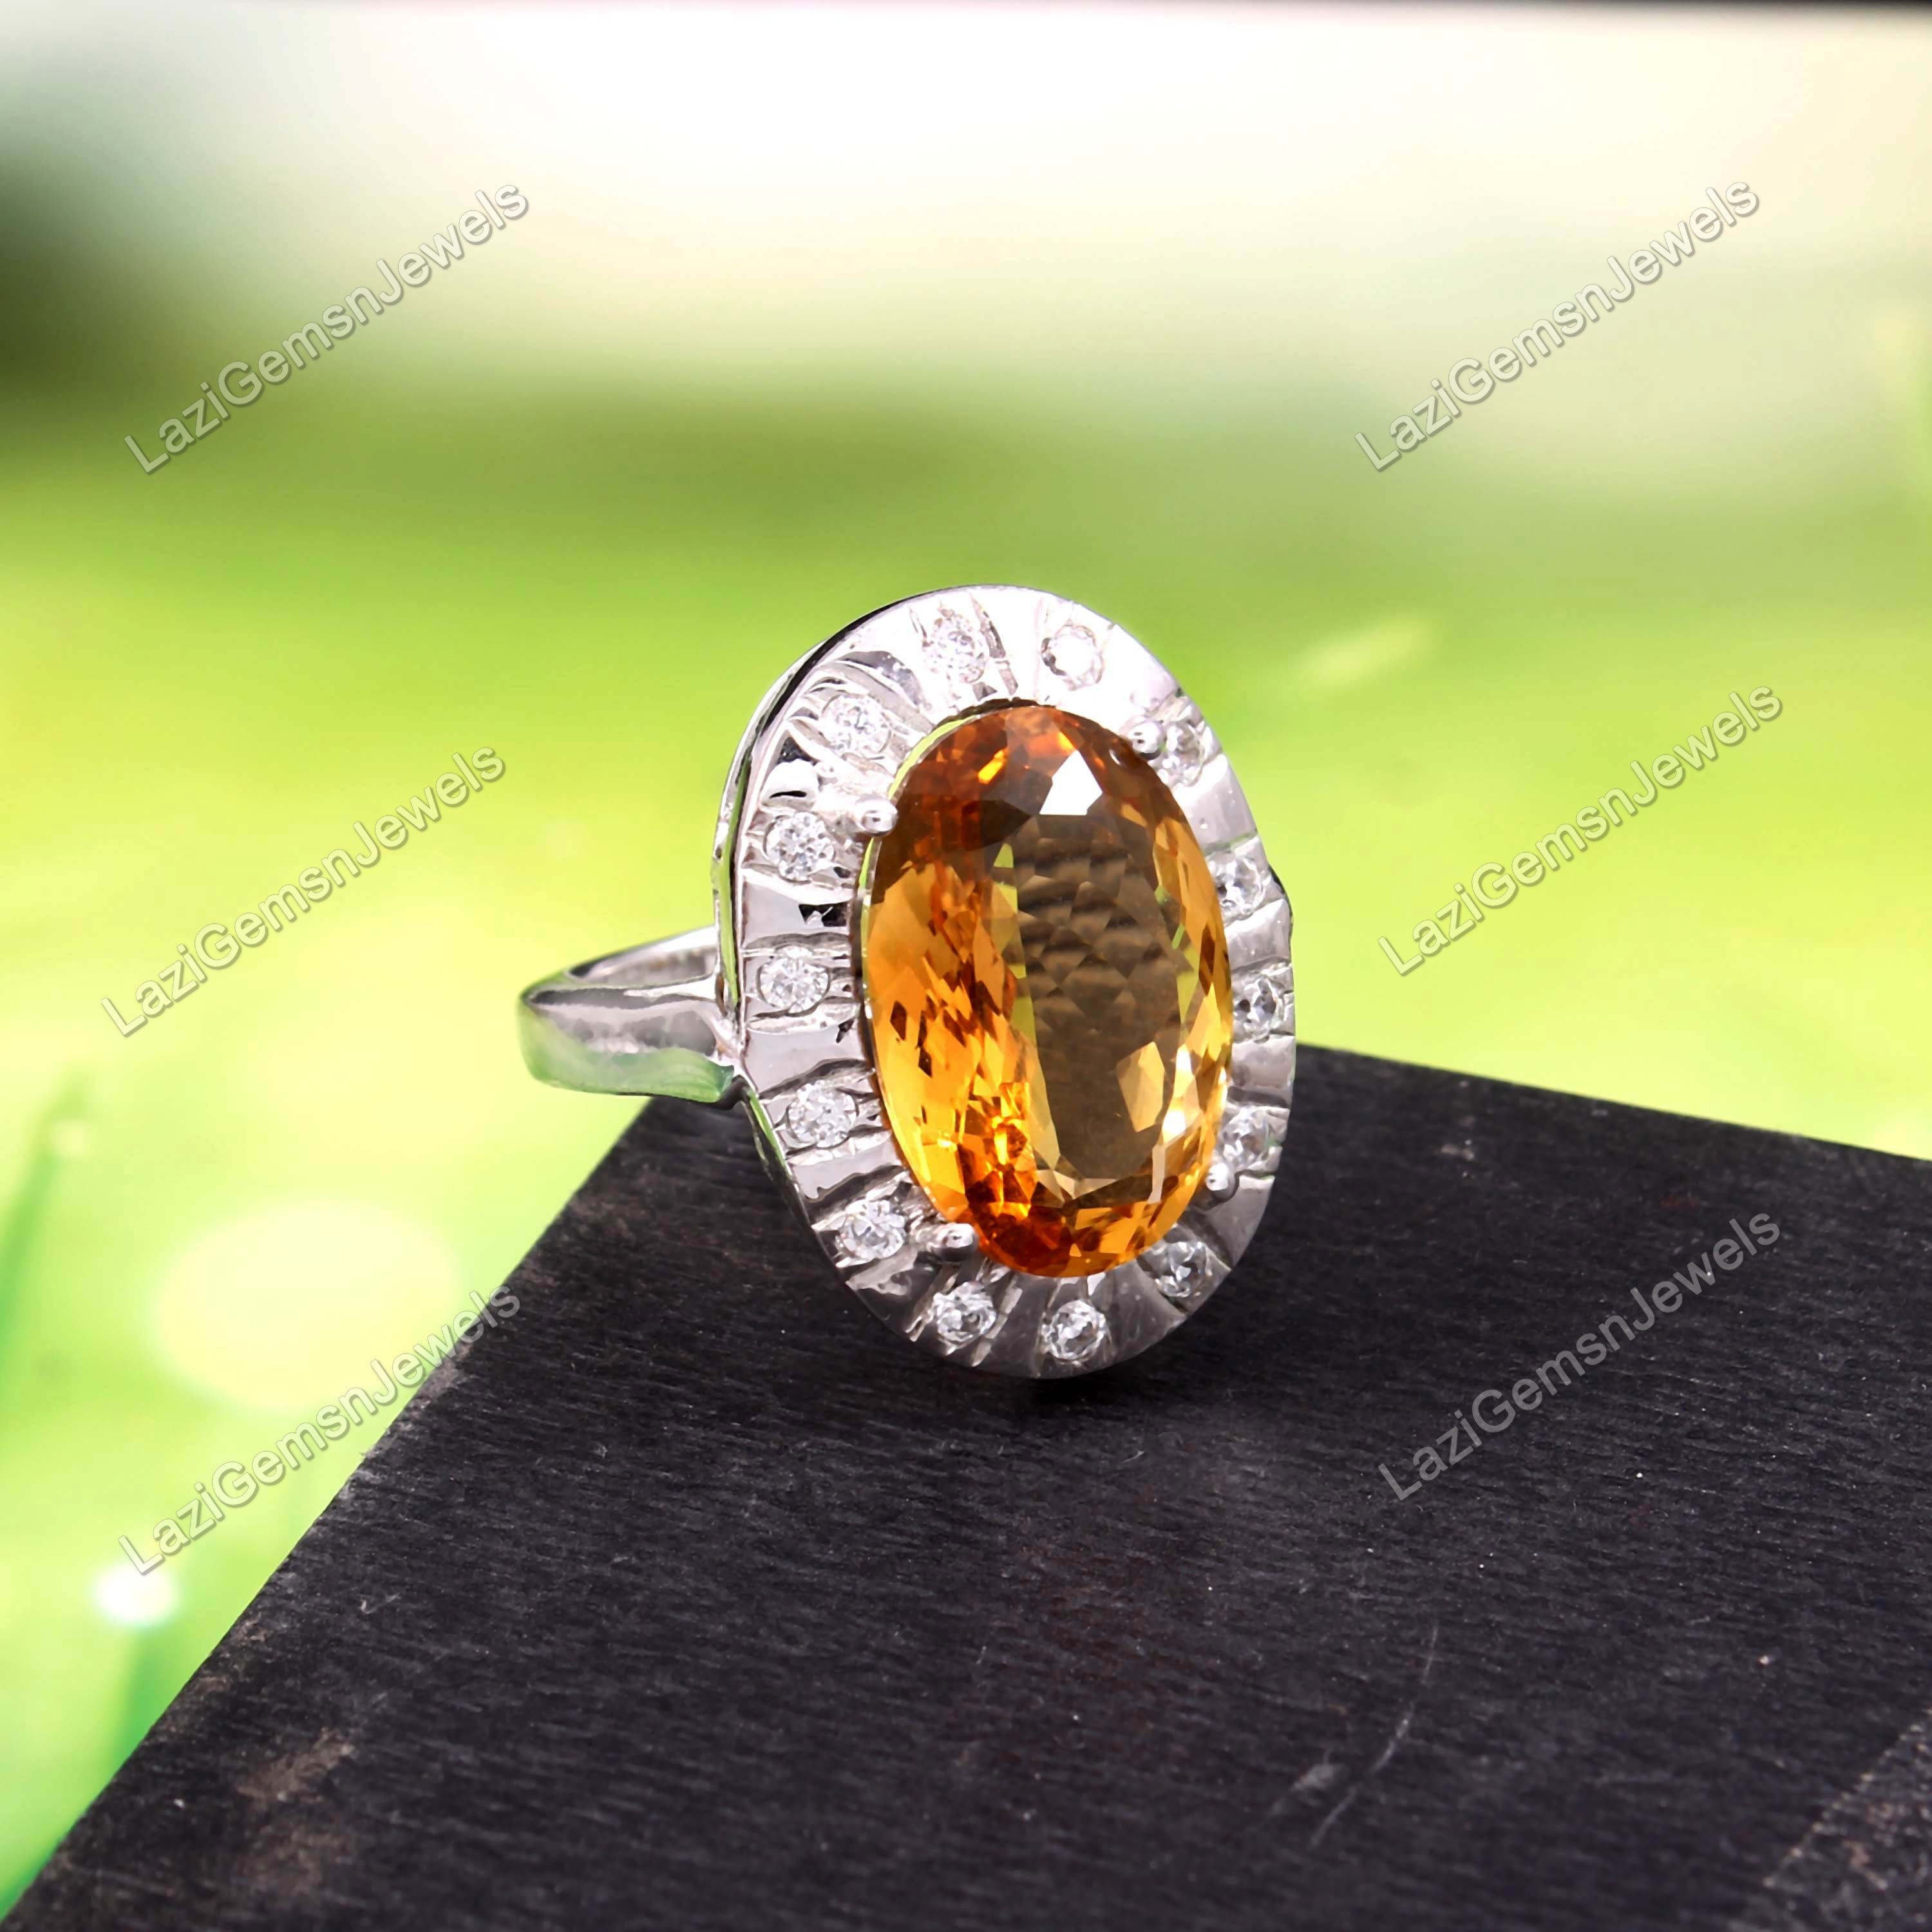 10k Yellow Gold Azotic Topaz Ring Size 6 3/4